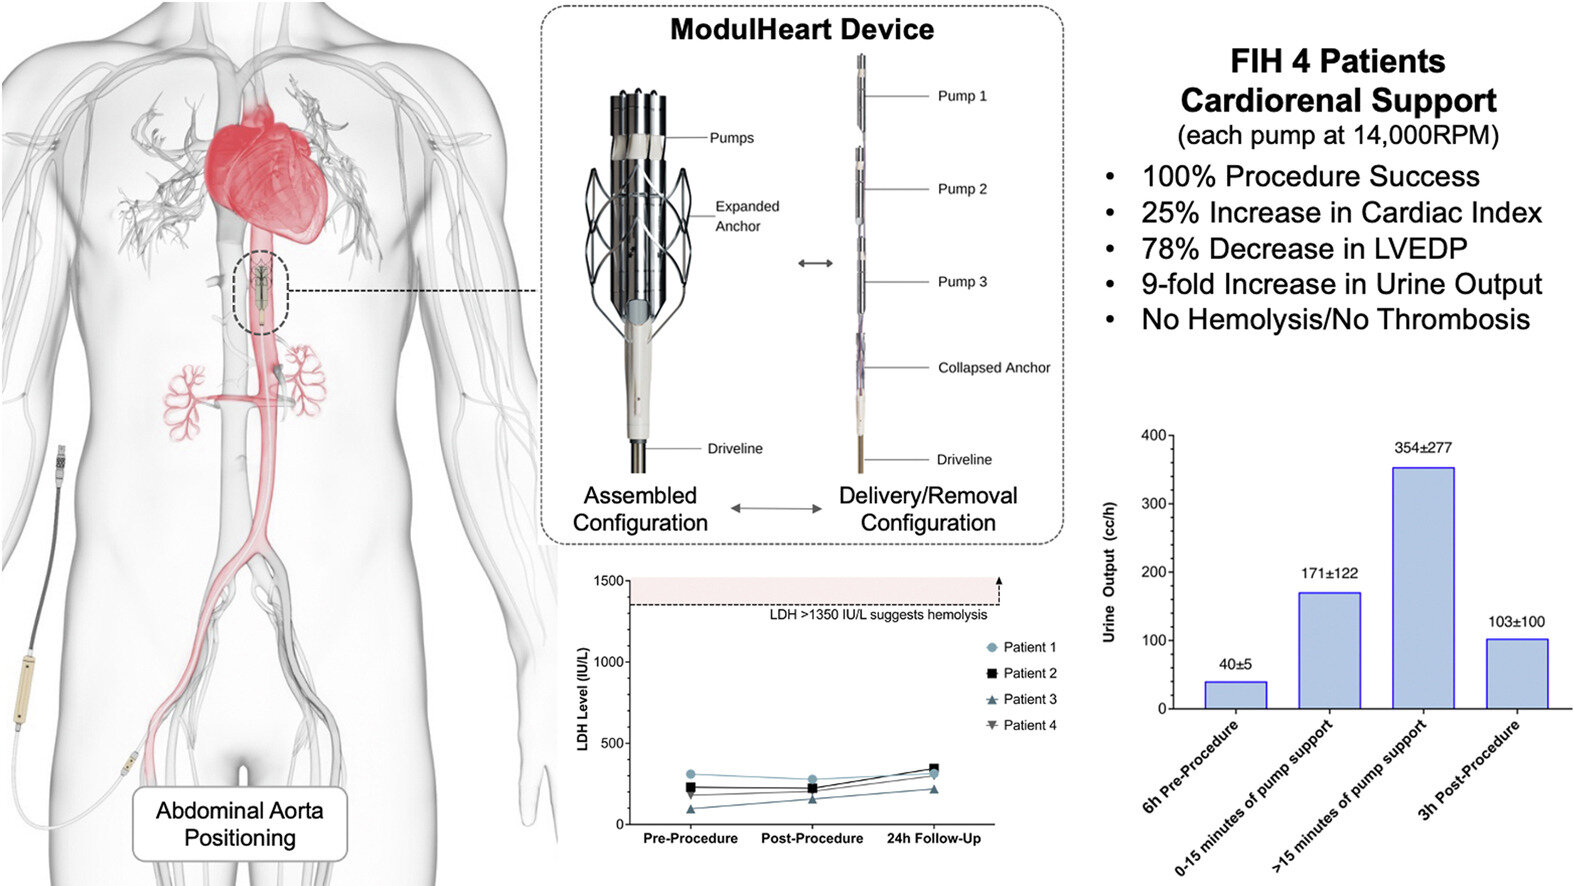 #Study finds mechanical circulatory support and renal perfusion success with the ModulHeart device